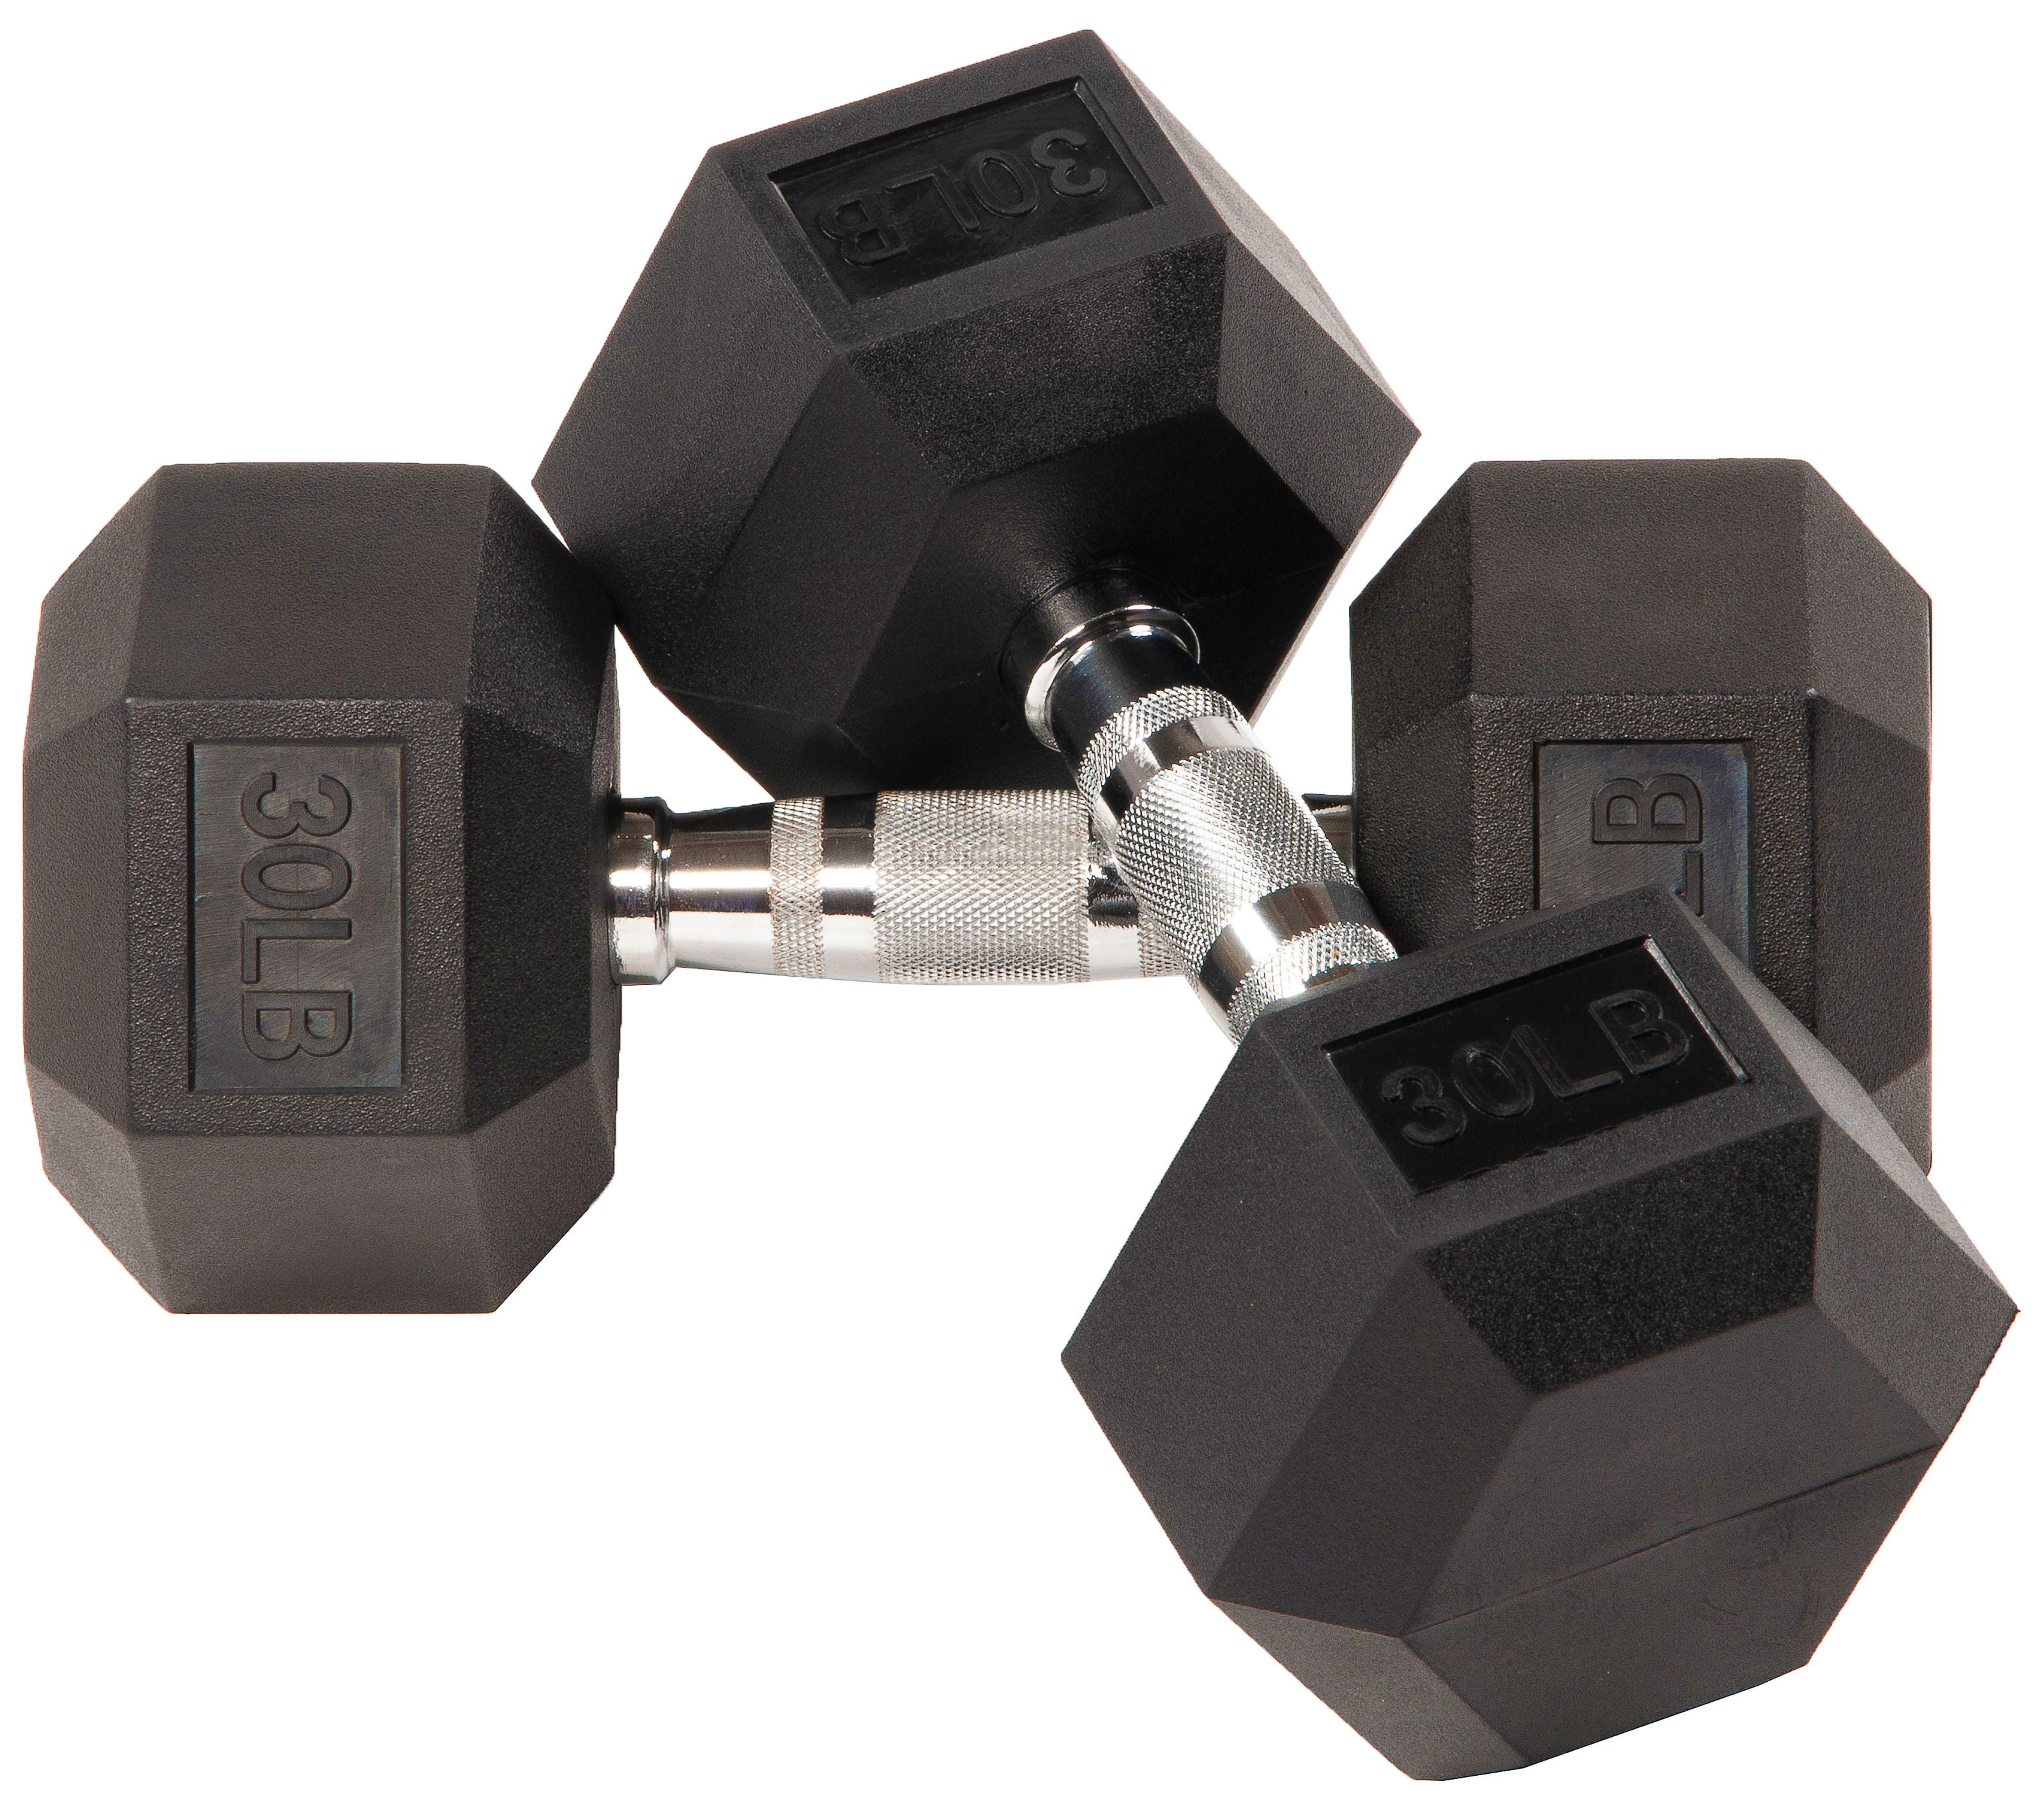 45 LB Home Gym Fit 30 Details about   New Rubber Coated Hex Dumbbells Weight Set 15 25 20 